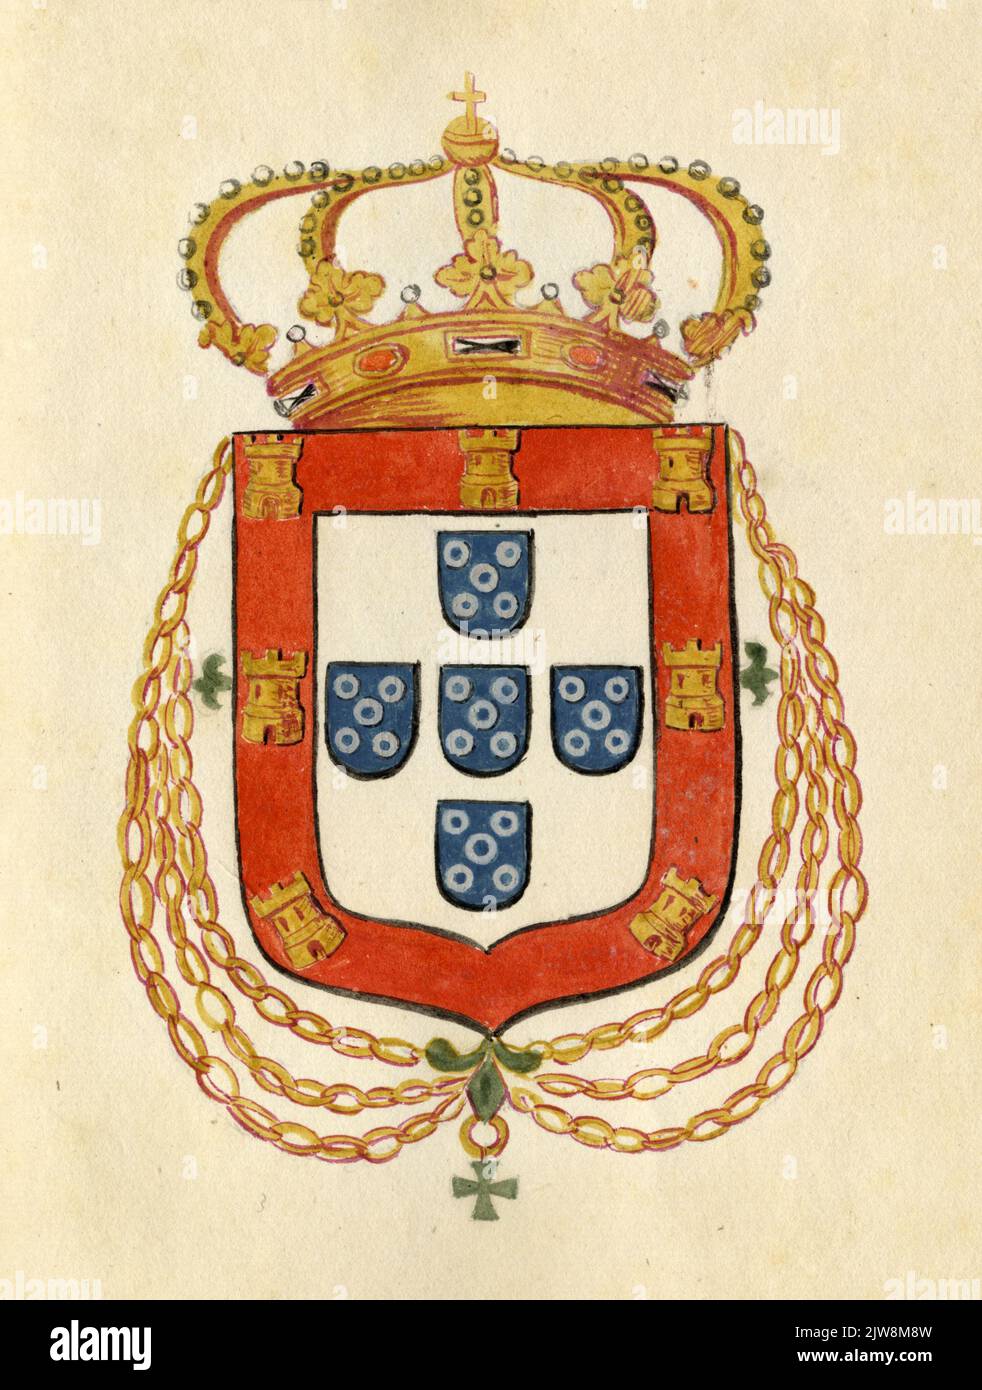 Portugal coat of arms Stock Photo - Alamy